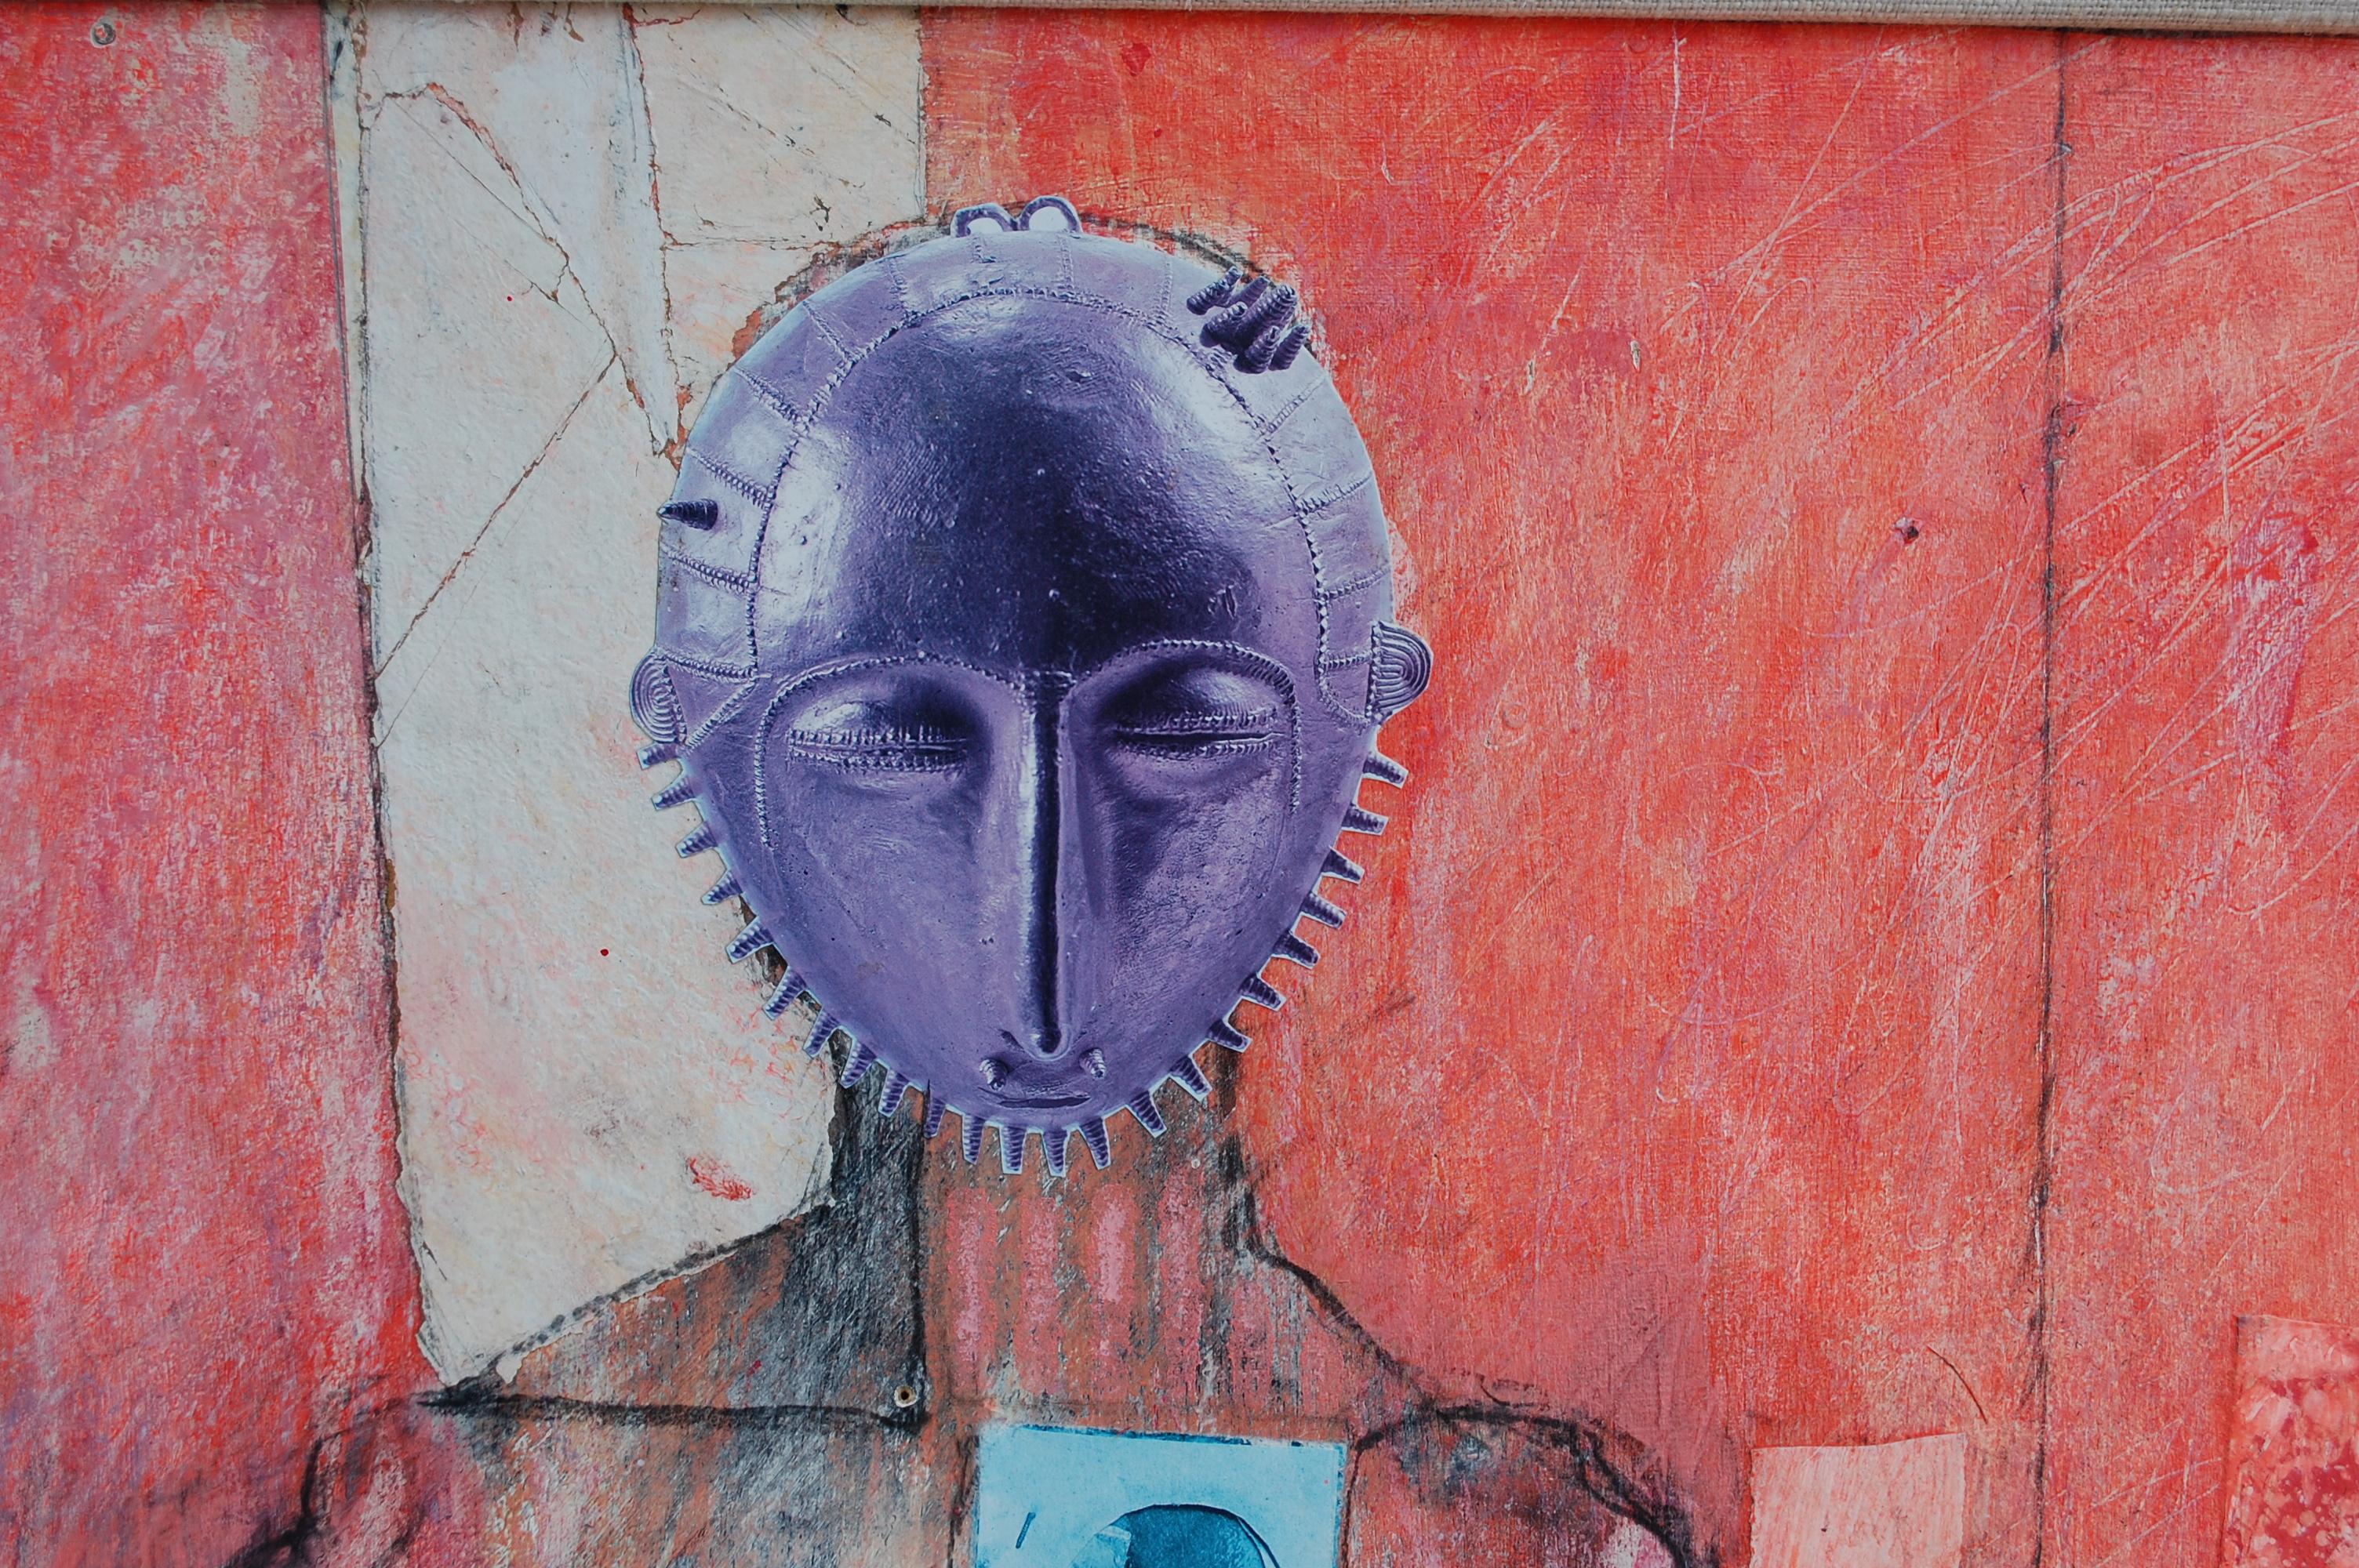 Primus Mixed Media on Panel - American Modern Painting by Patrick Archer